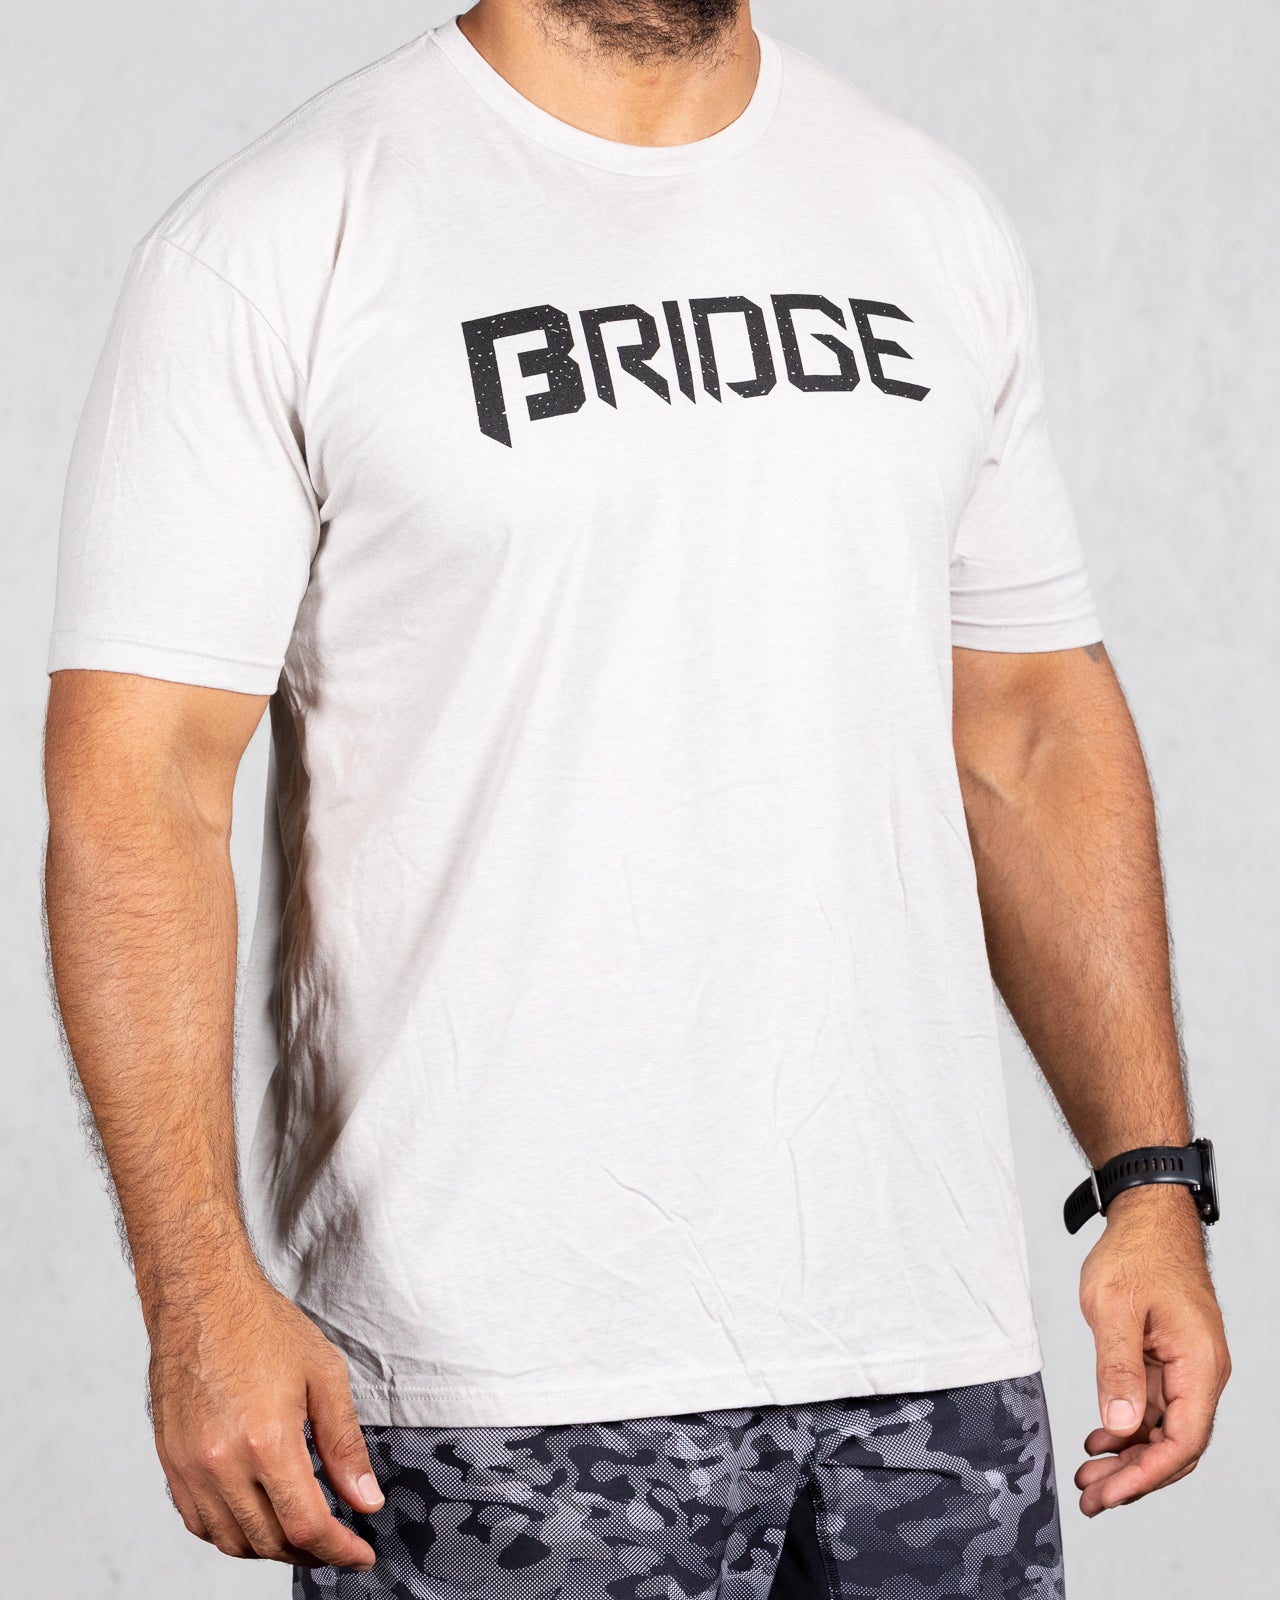 man wearing sand colored squad tee with bridge on the front